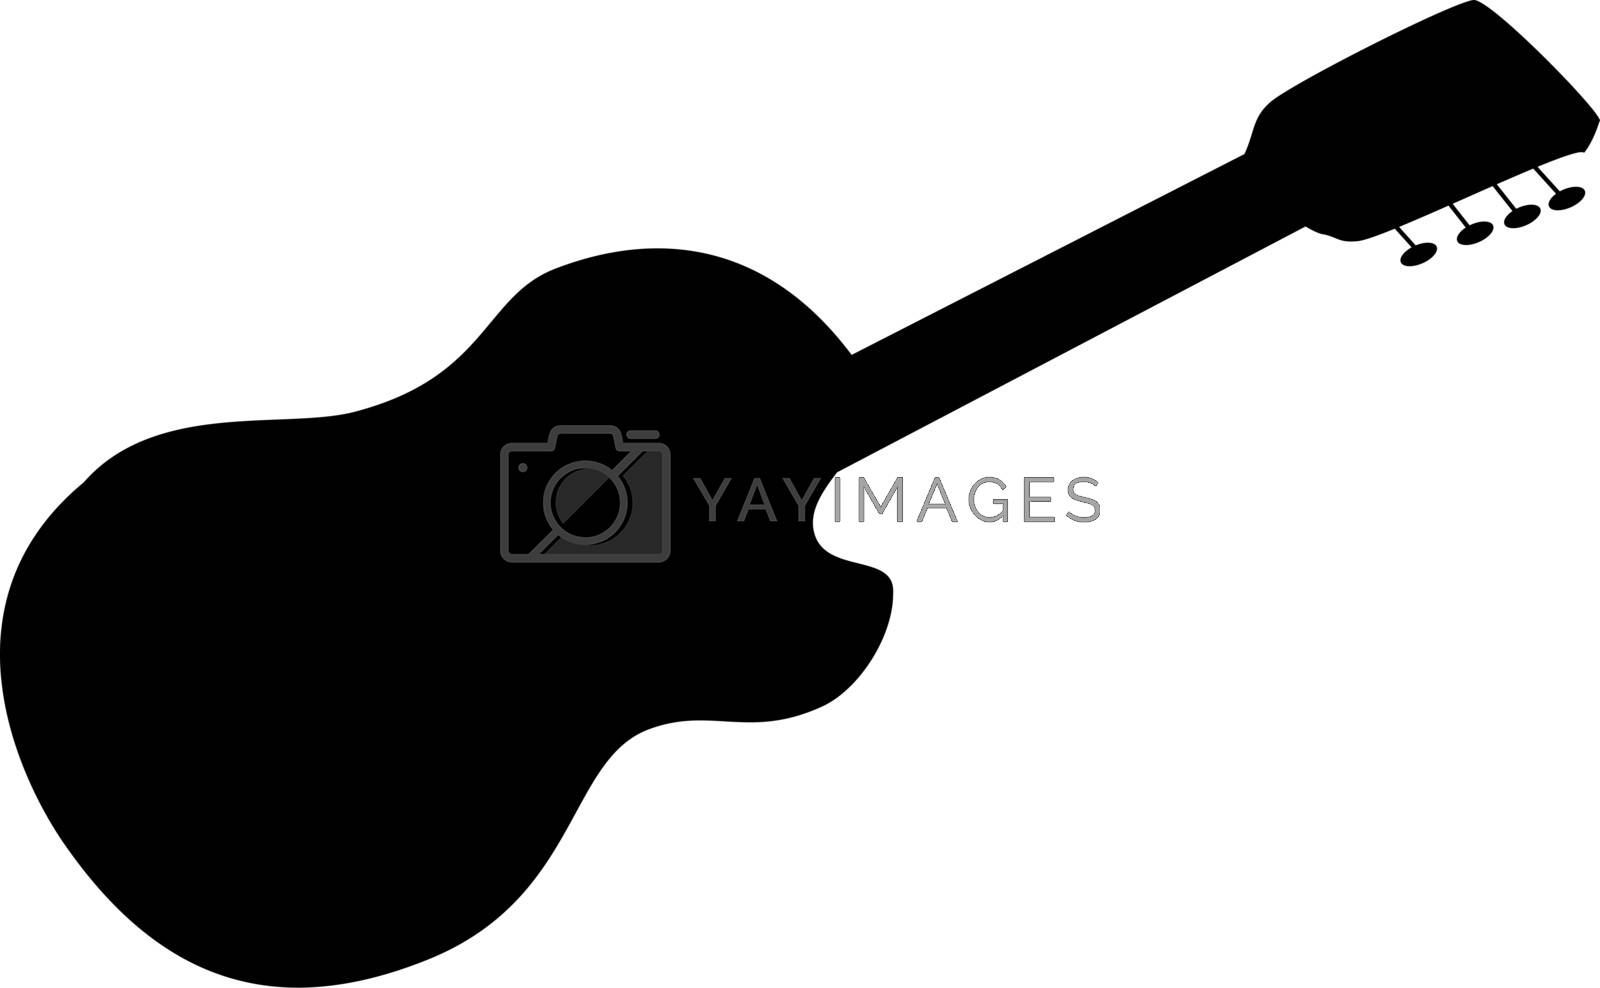 Royalty free image of acoustic guitar, silhouette by alexcoolok